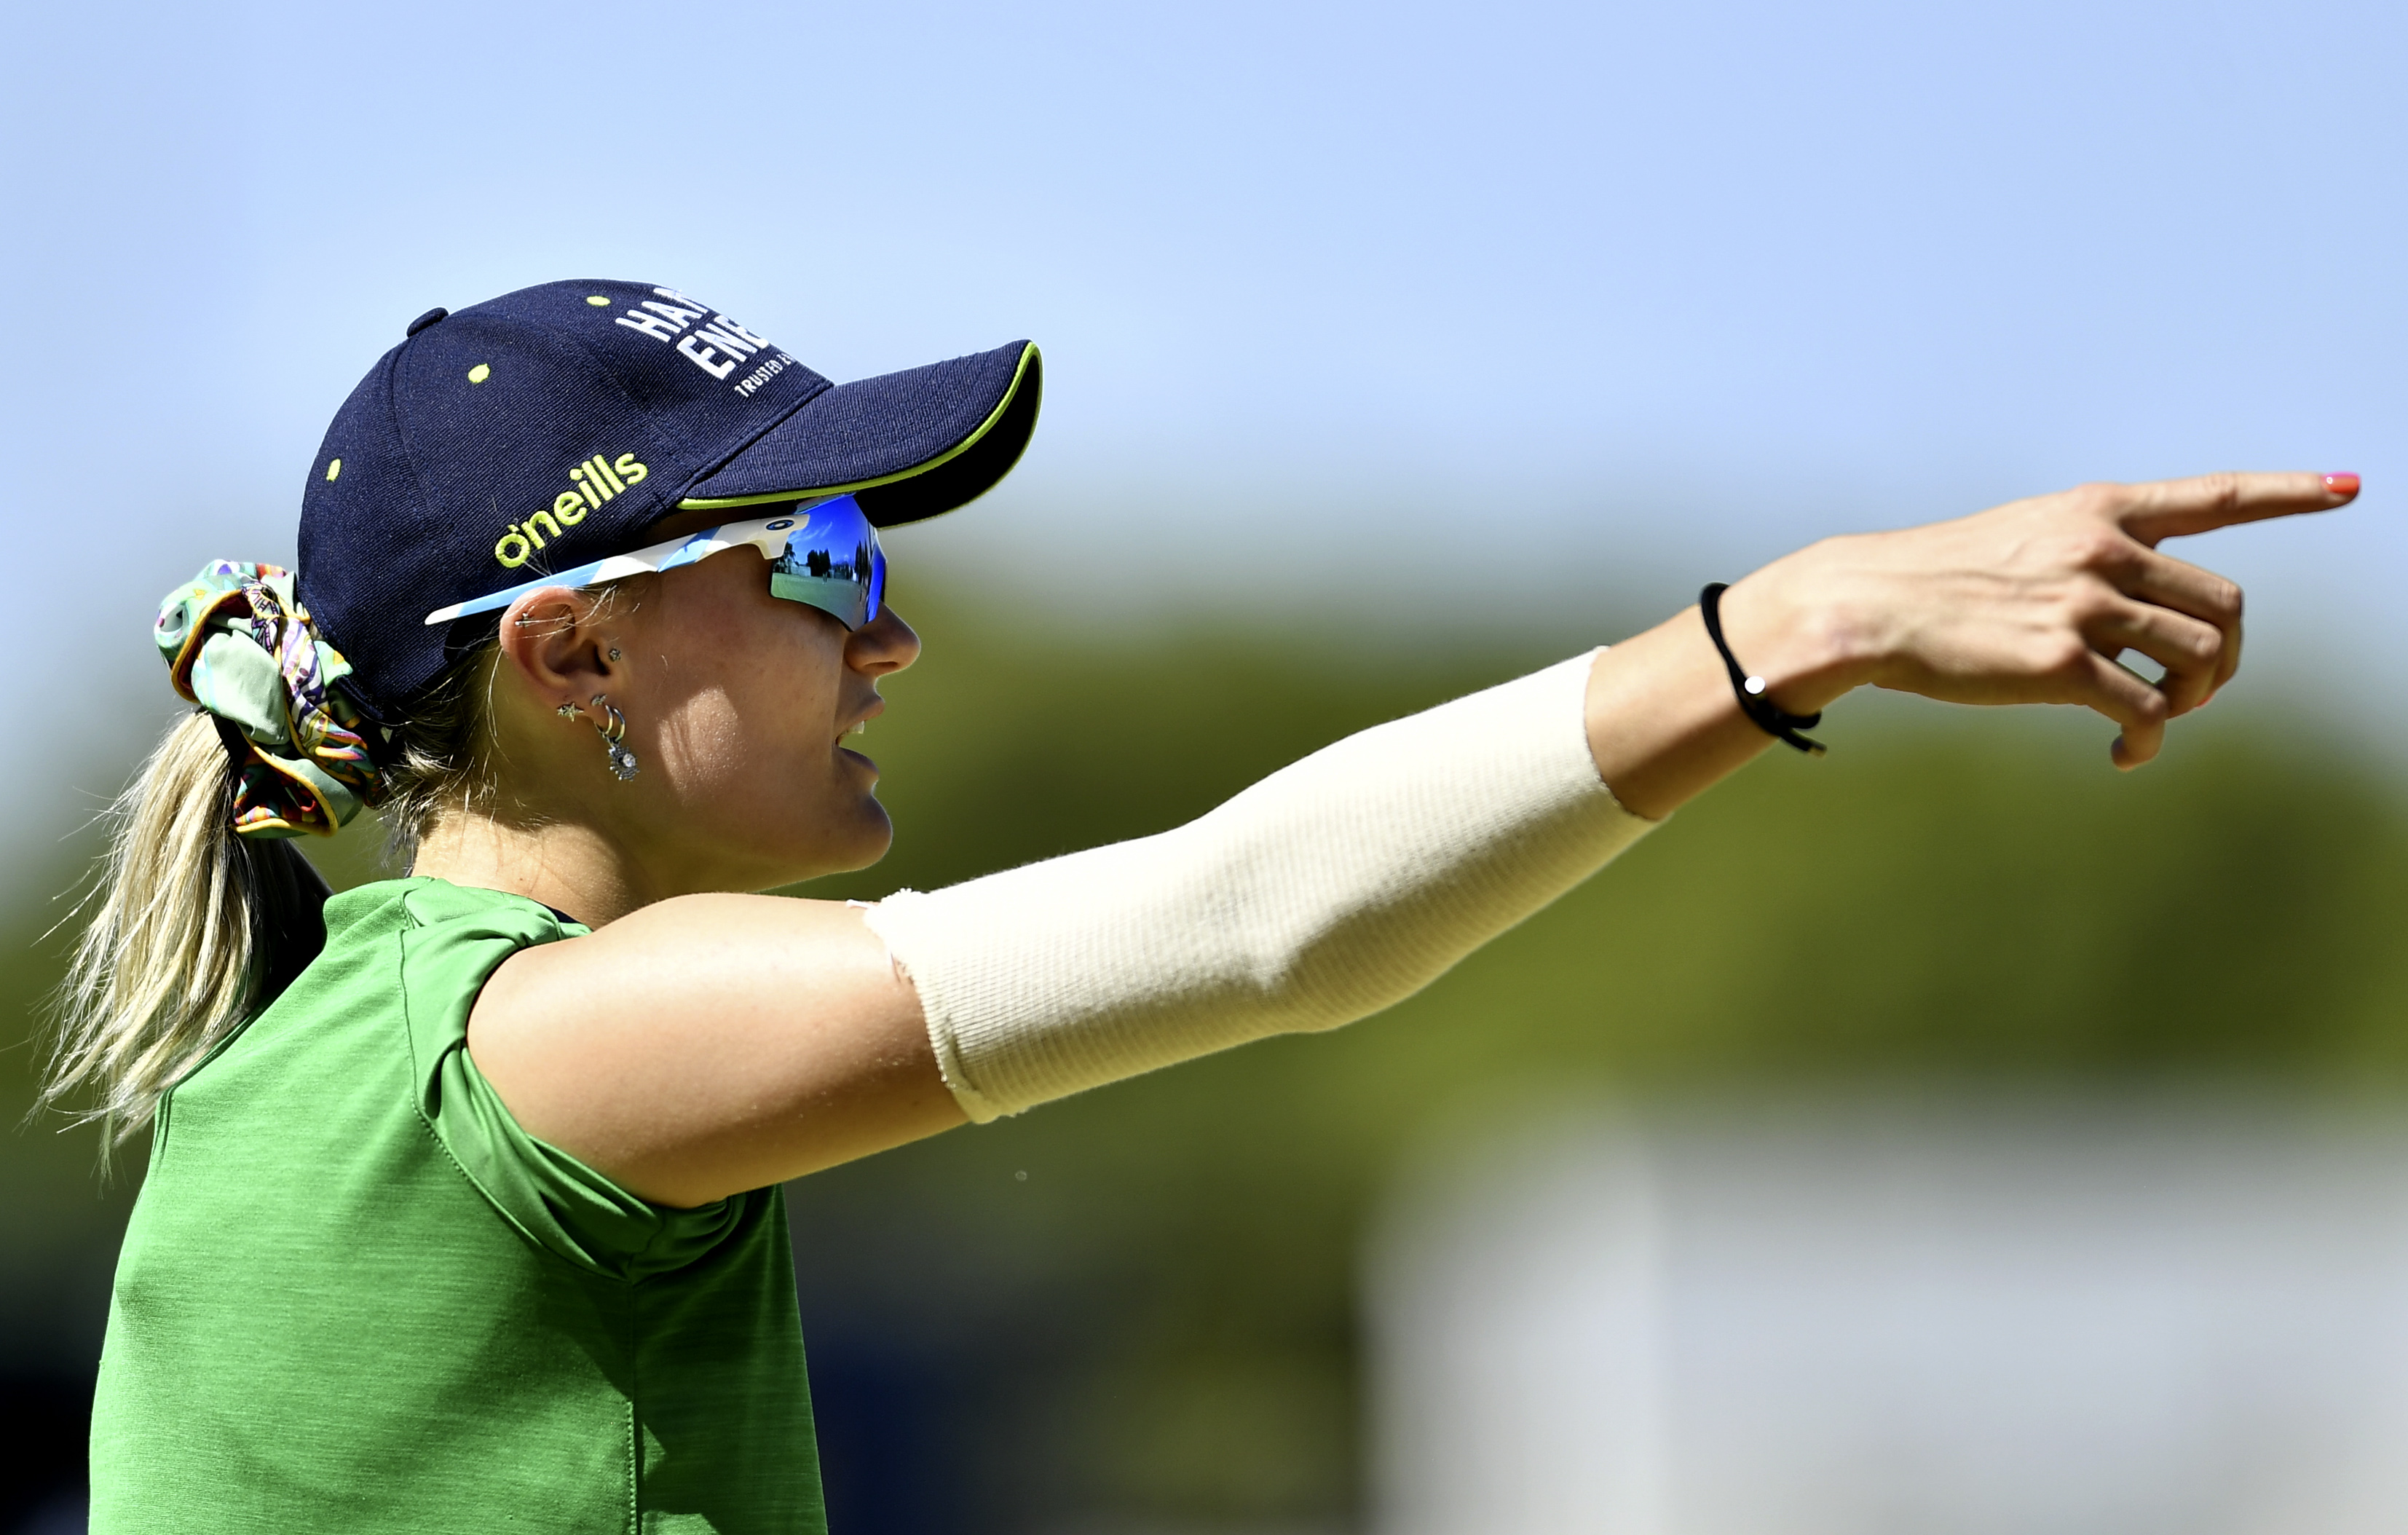 Cricket Ireland: Gaby Lewis - "We’re ready, and we won’t let this opportunity pass us by”; Ireland matches on Sky Sports